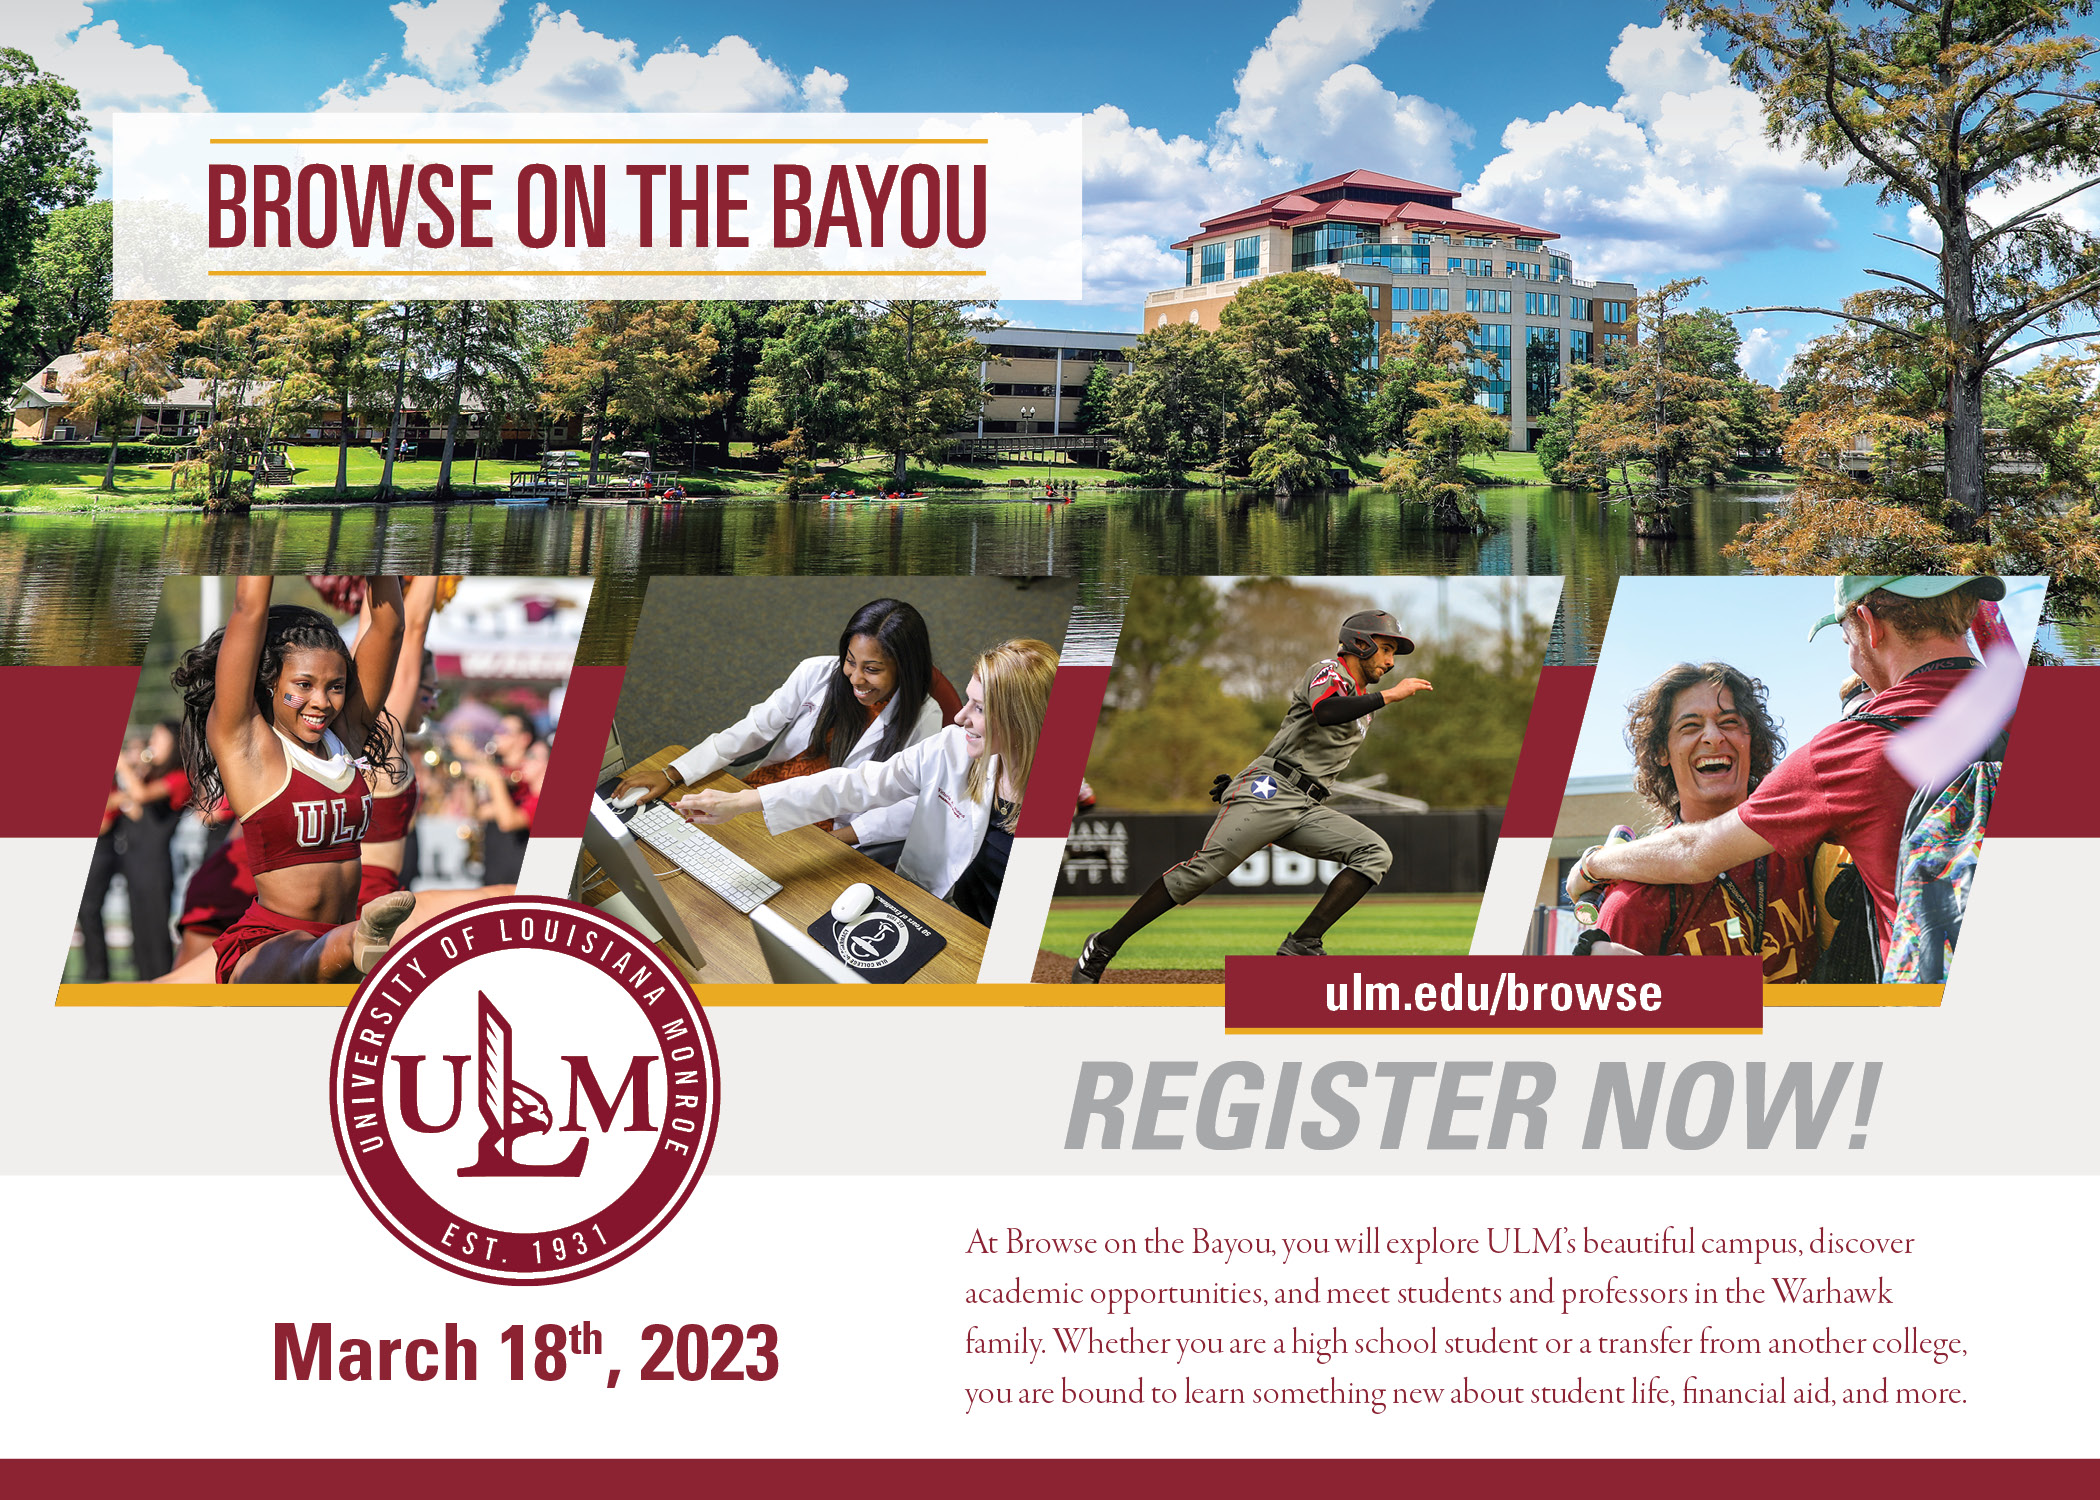 Four photos (a cheerleader, two students pointing at a computer, a baseball player, and two students smiling and embracing) layover an image of a tall building overlooking a bayou. People are kayaking on the bayou. ULM's logo is in the corner. Text reads, "Browse on the Bayou. ulm.edu/browse REGISTER NOW! At Browse on the Bayou, you will explore ULM's beautiful campus, discover academic opportunities, and meet students and professors in the Warhawk family. Whether you are a high school student or a transfer from another college, you are bound to learn something new about student life, financial aid, and more."